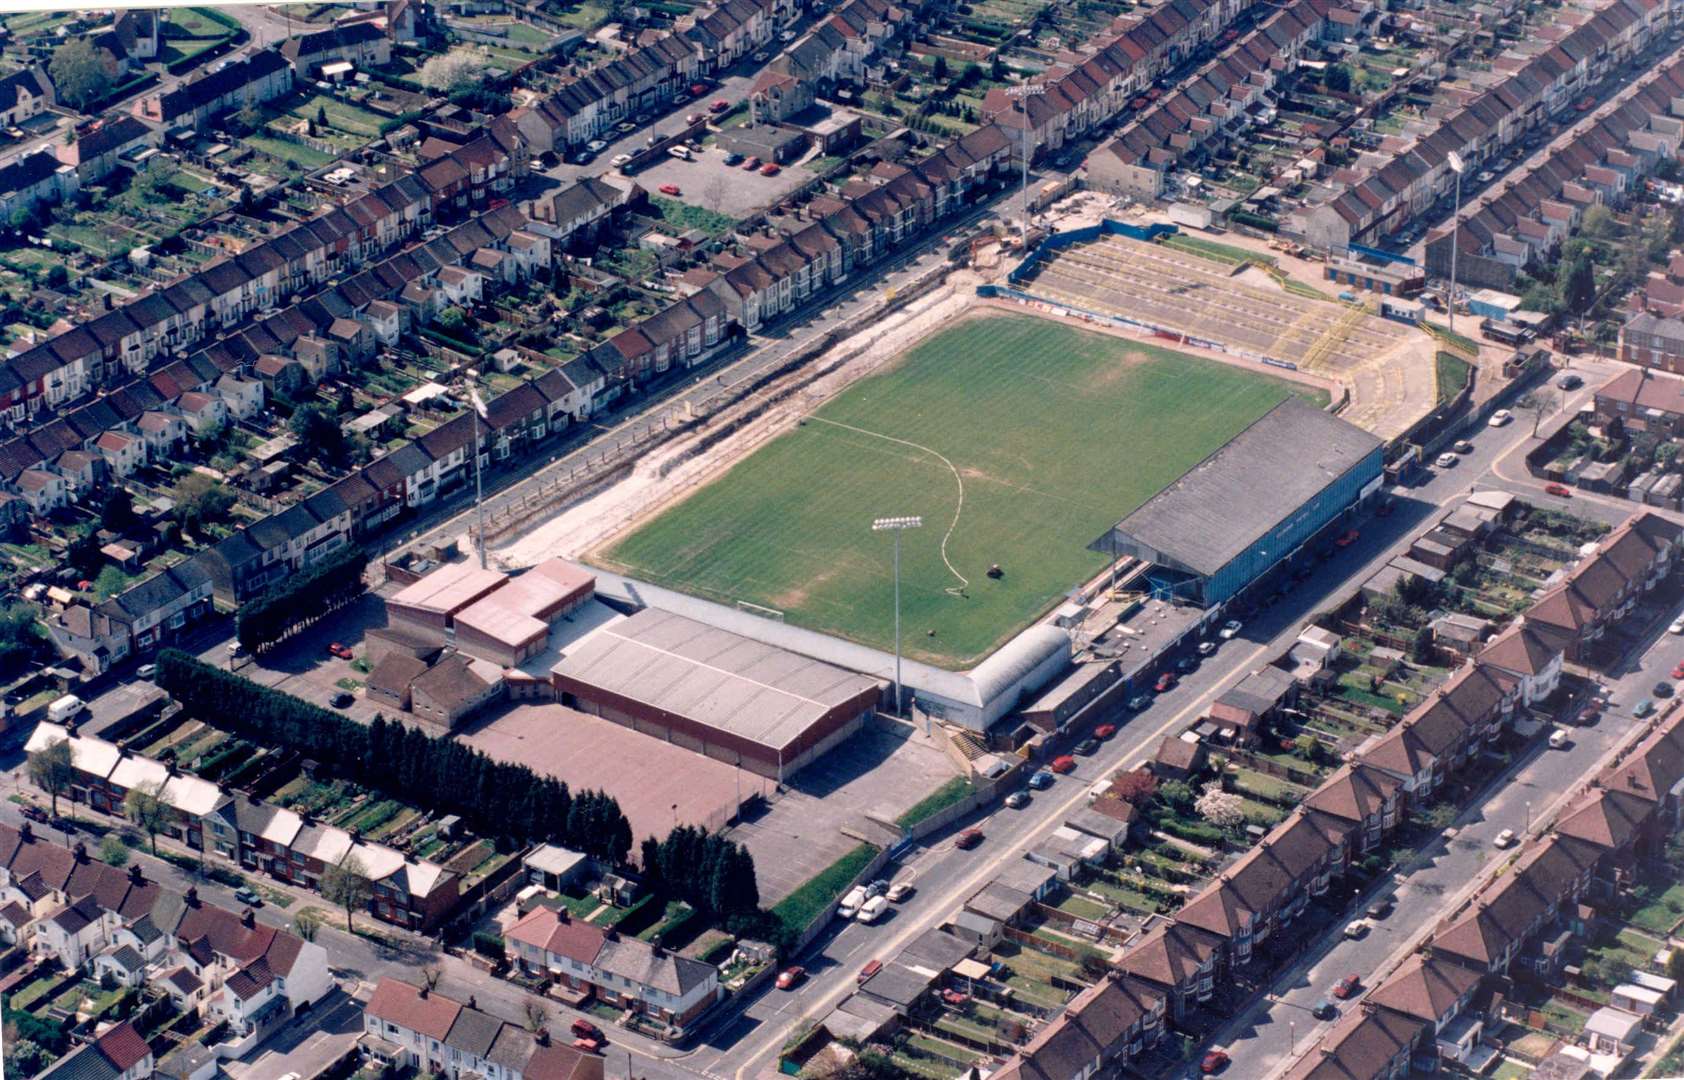 Aerial view of the Gills' home ground Priestfield dated 1997